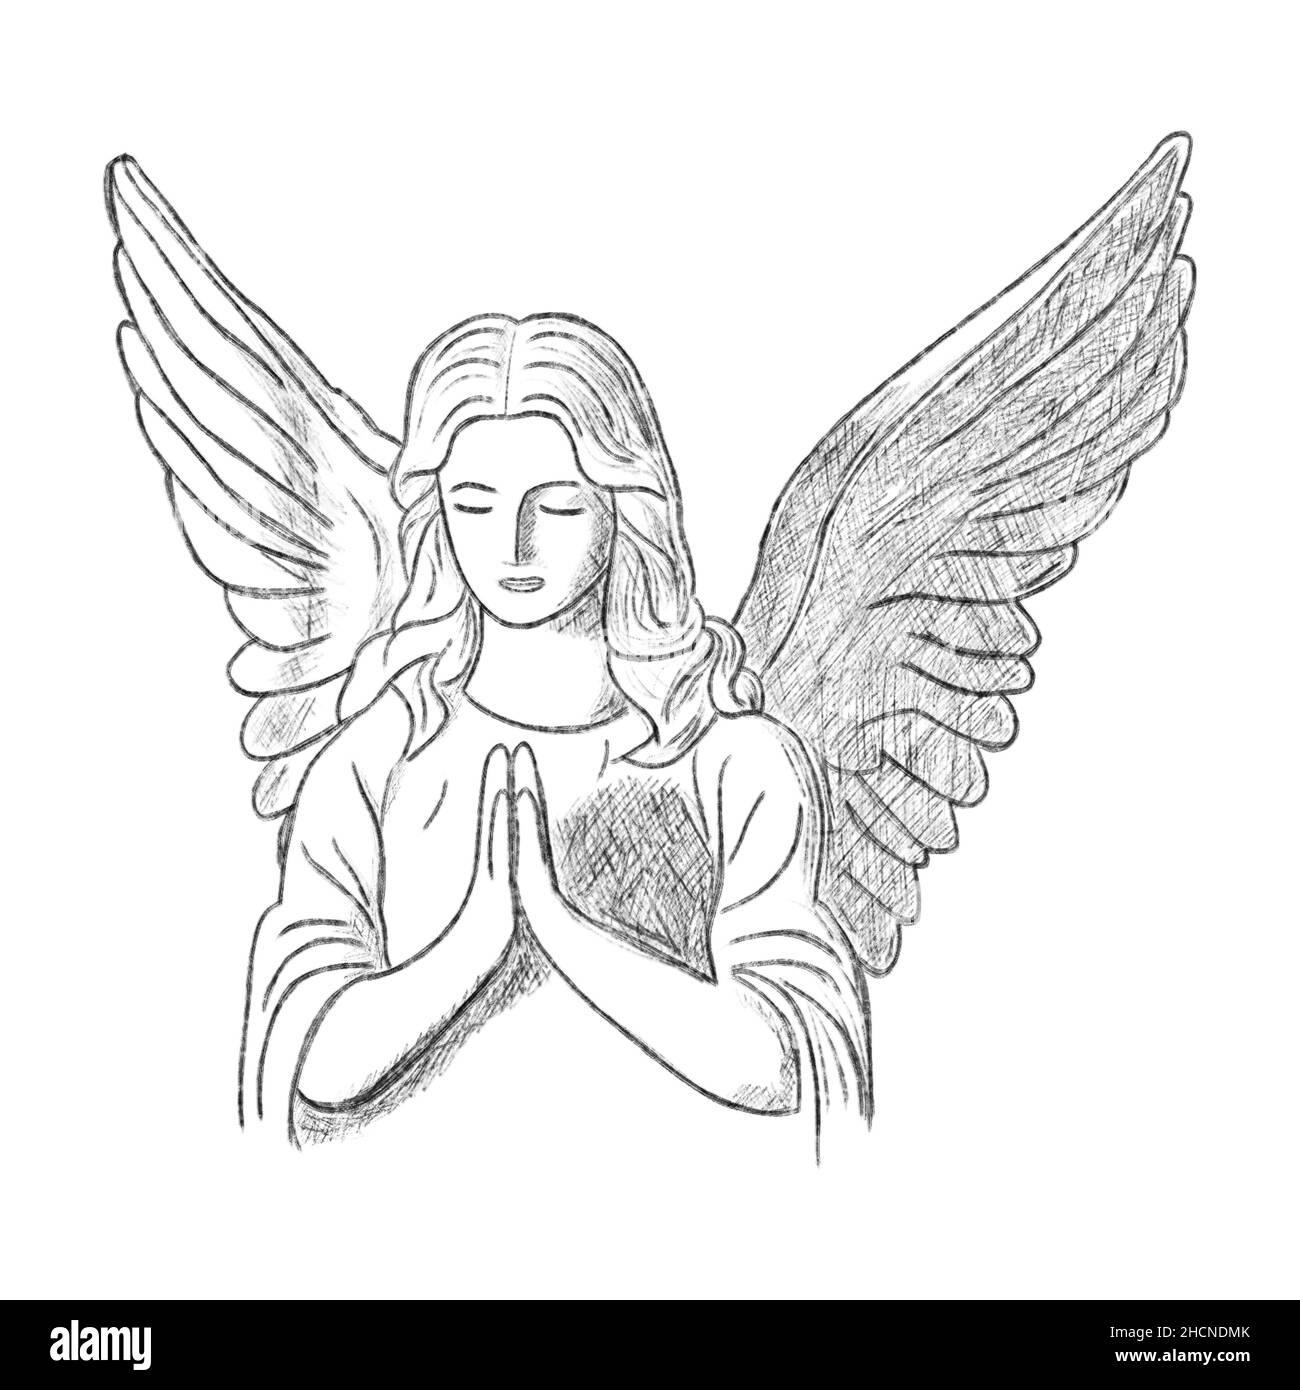 23+ Best Angels Drawings For Inspiration 2020 - Templatefor